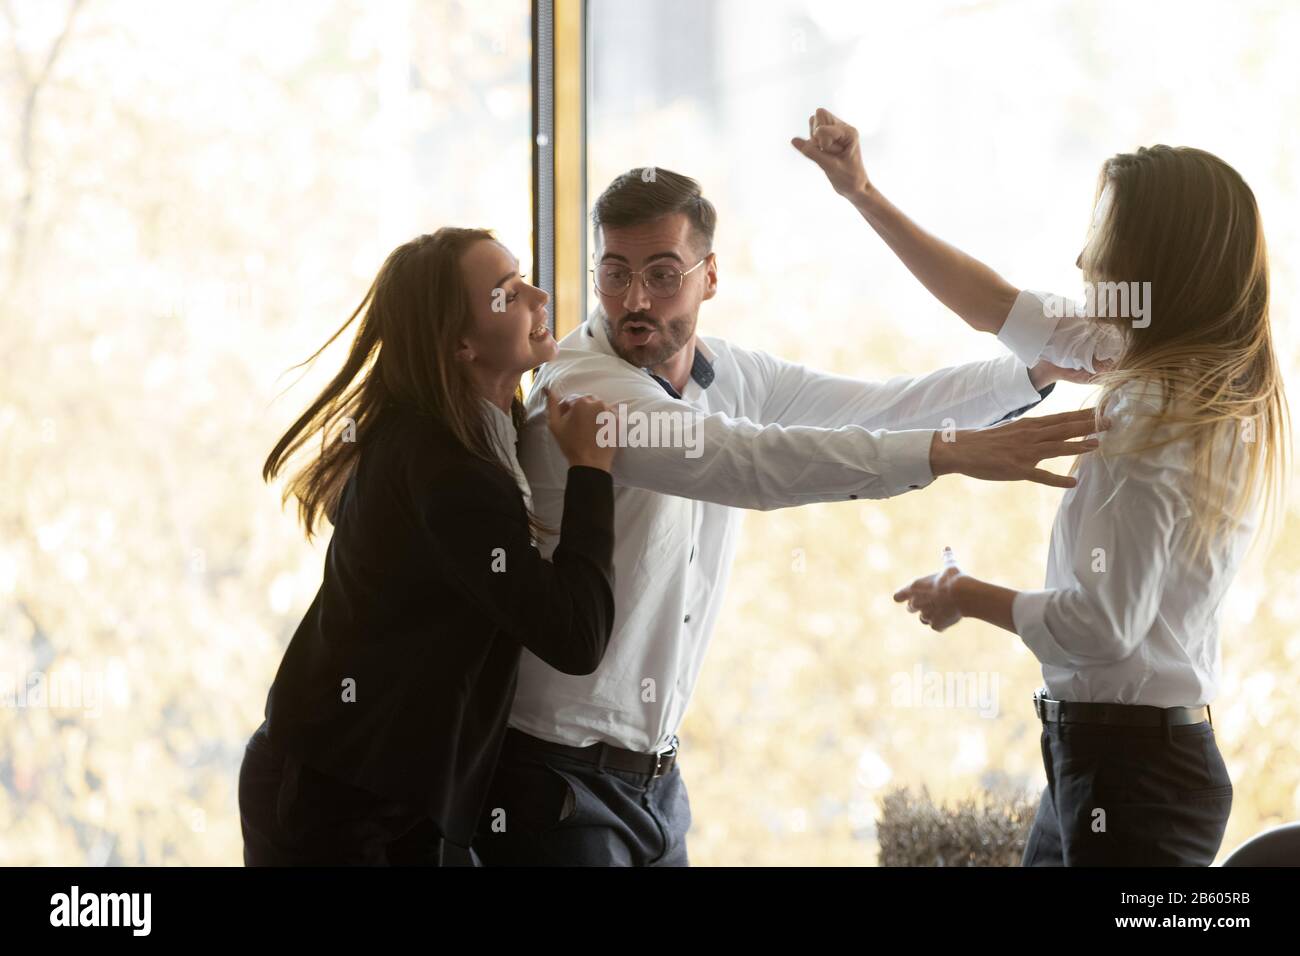 Millennial businessman setting apart two aggressive fighting female colleagues. Stock Photo